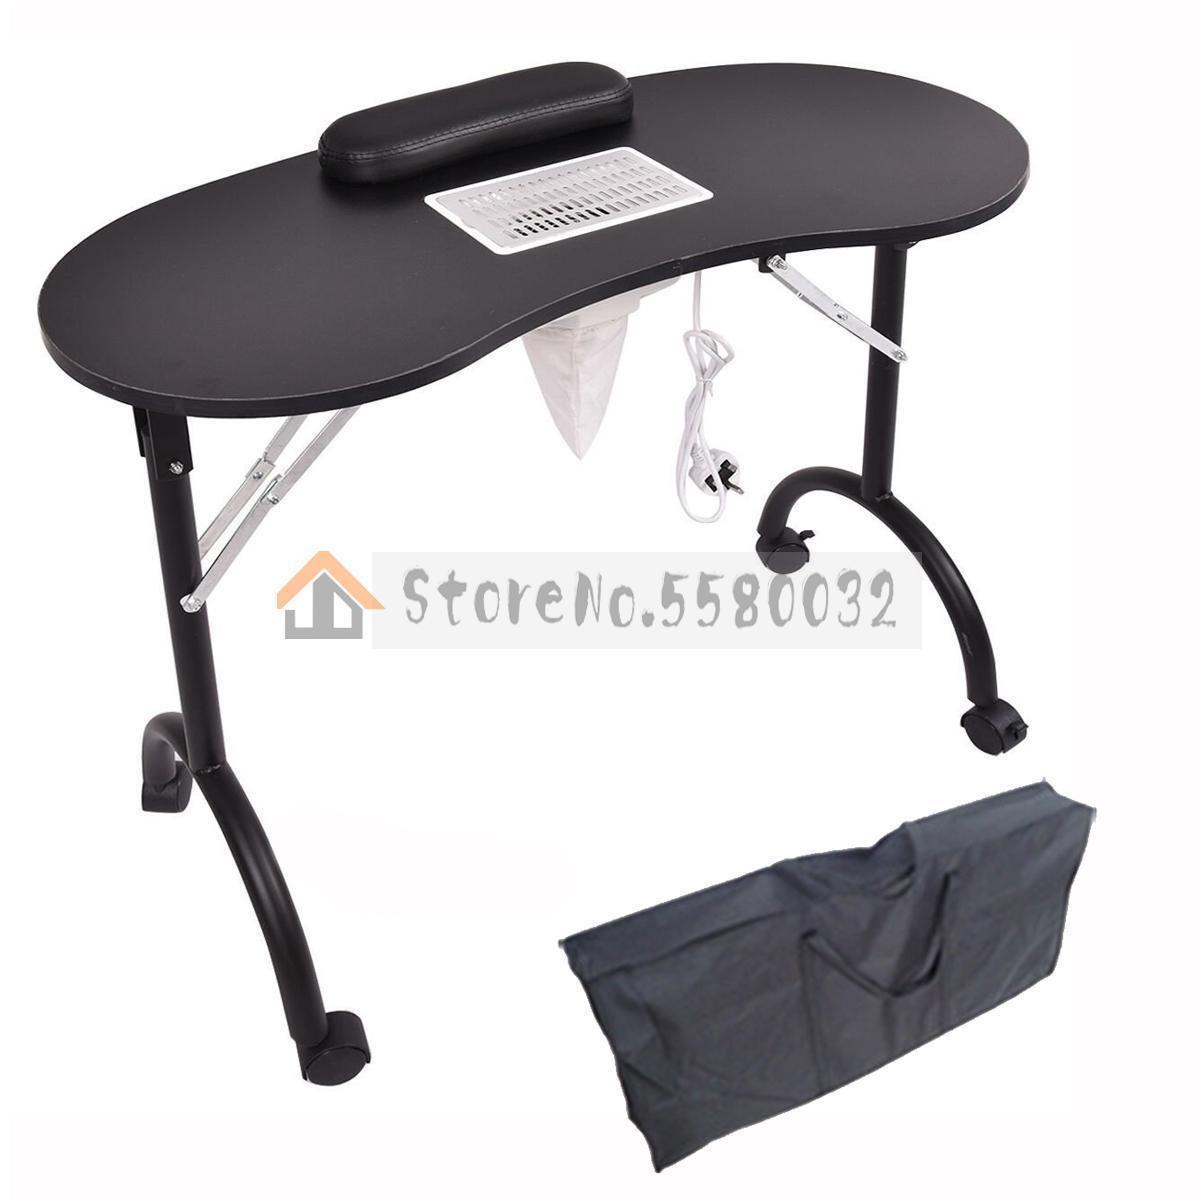 H1 Manicure Desk With Vacuum Cleaner Nail Art Table Spa Beauty